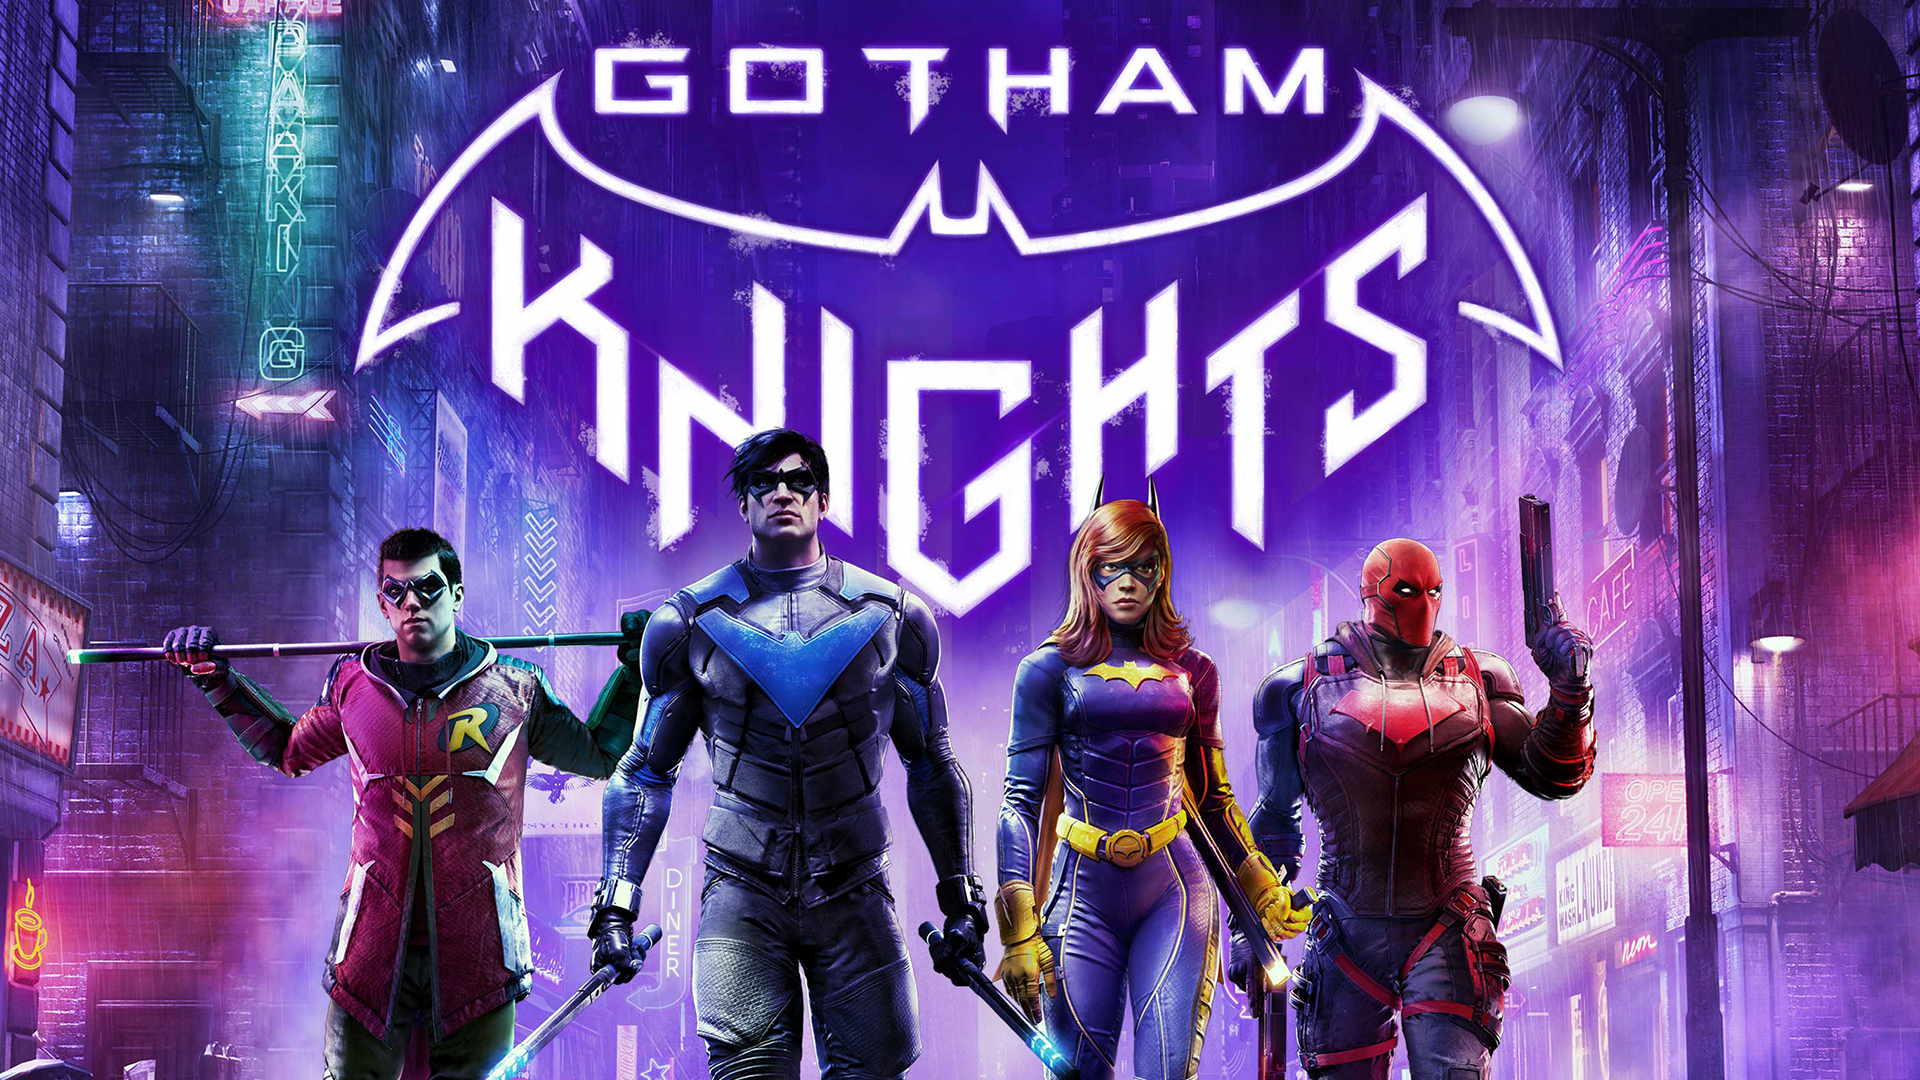 Who is the best character to pick in Gotham Knights?